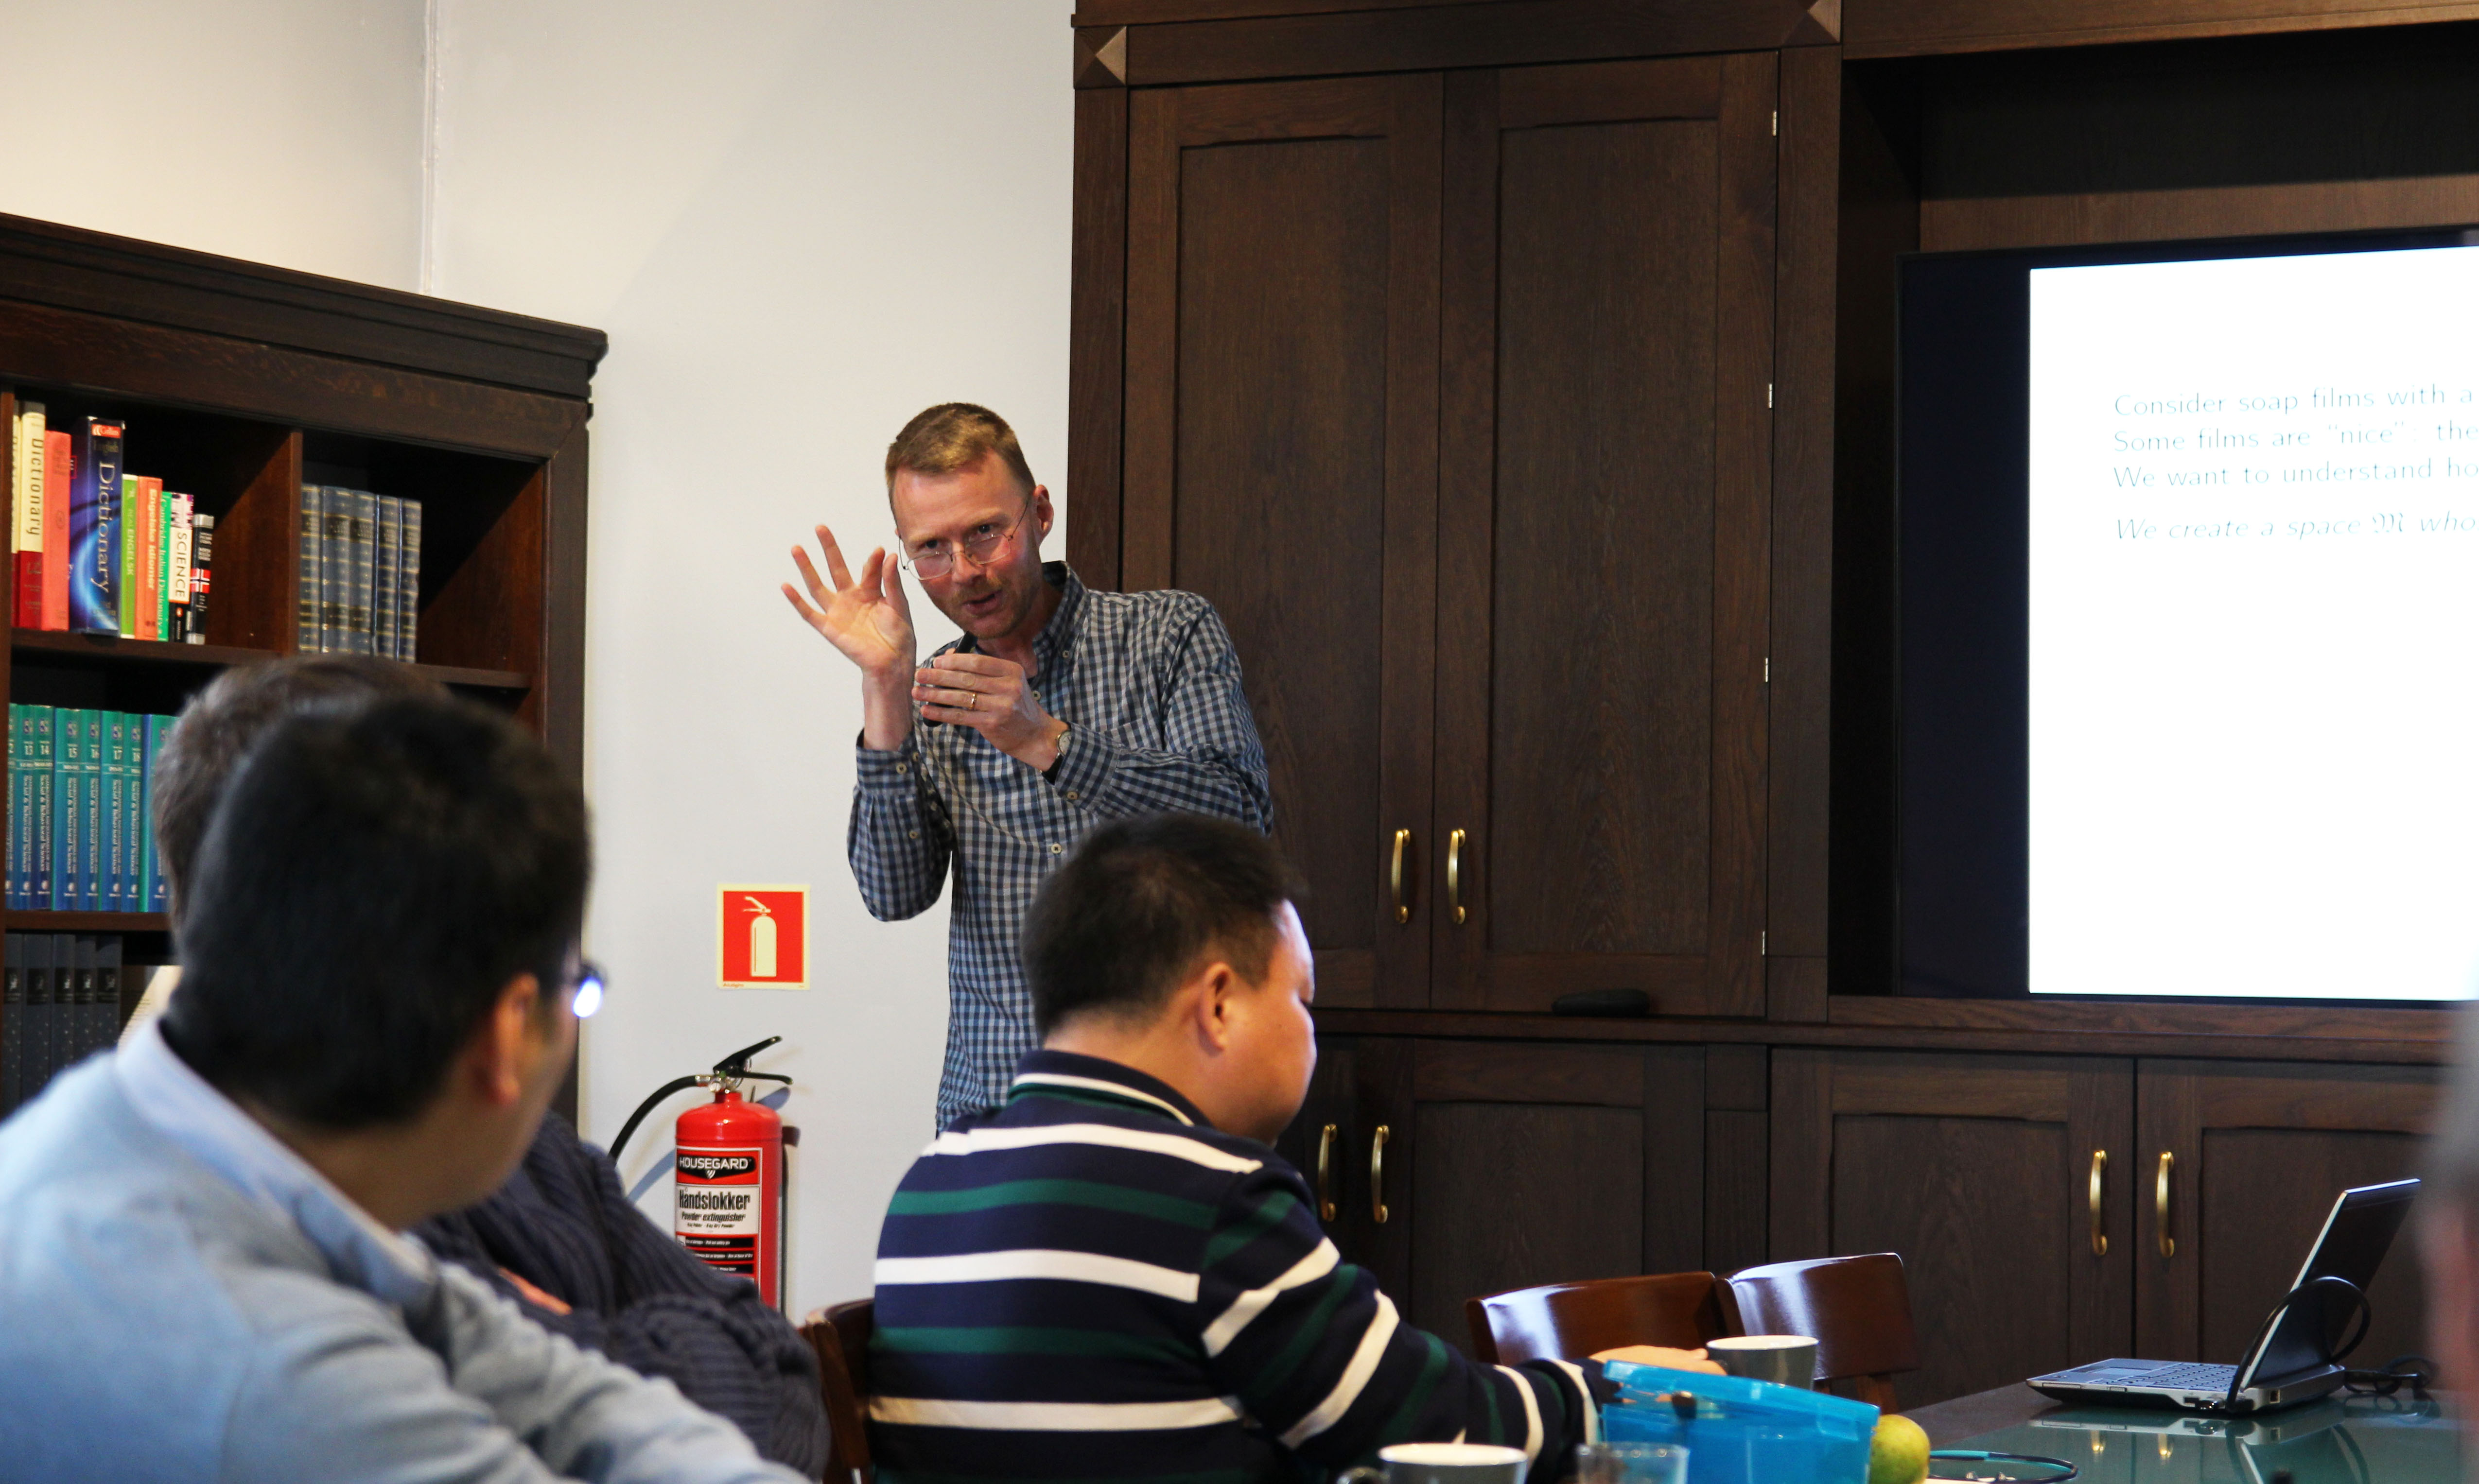 In his lunch seminar “Spaces of spaces” at CAS, Prof. Finnur Larusson took the opportunity to talk more generally about his field describing pure mathematics as 'mathematics for its own sake, driven by its own internal forces'.